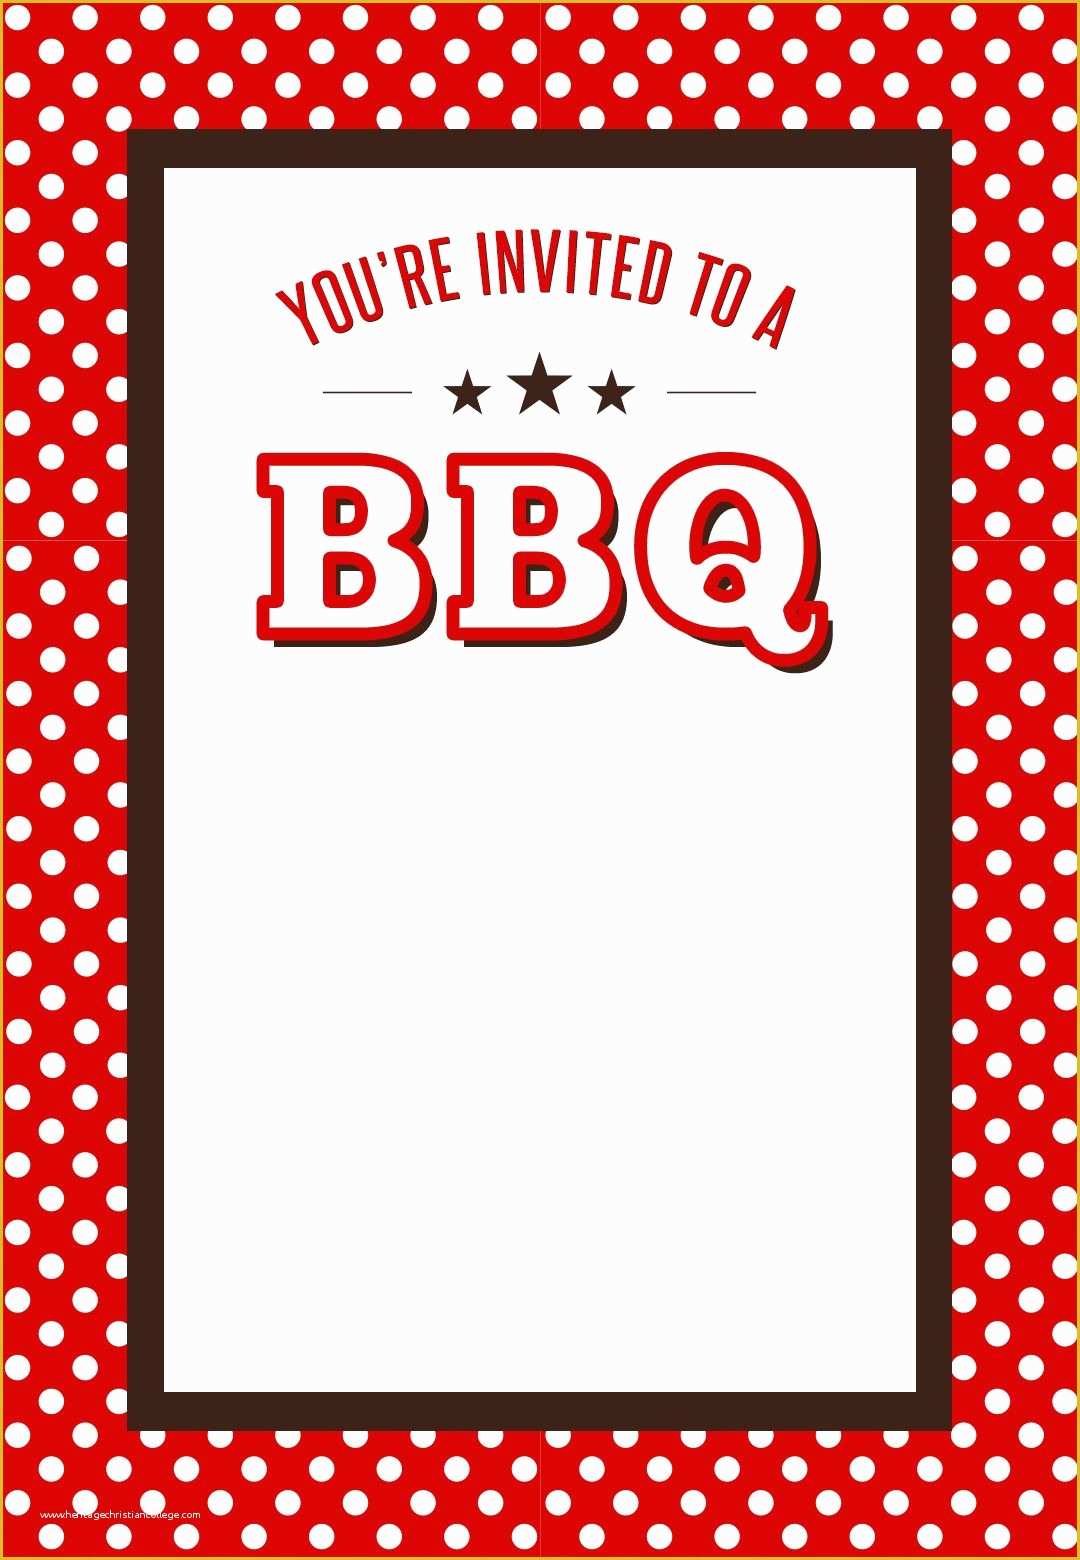 Free Downloadable Bbq Invitation Template Of Bbq Party Invitation Free Printables